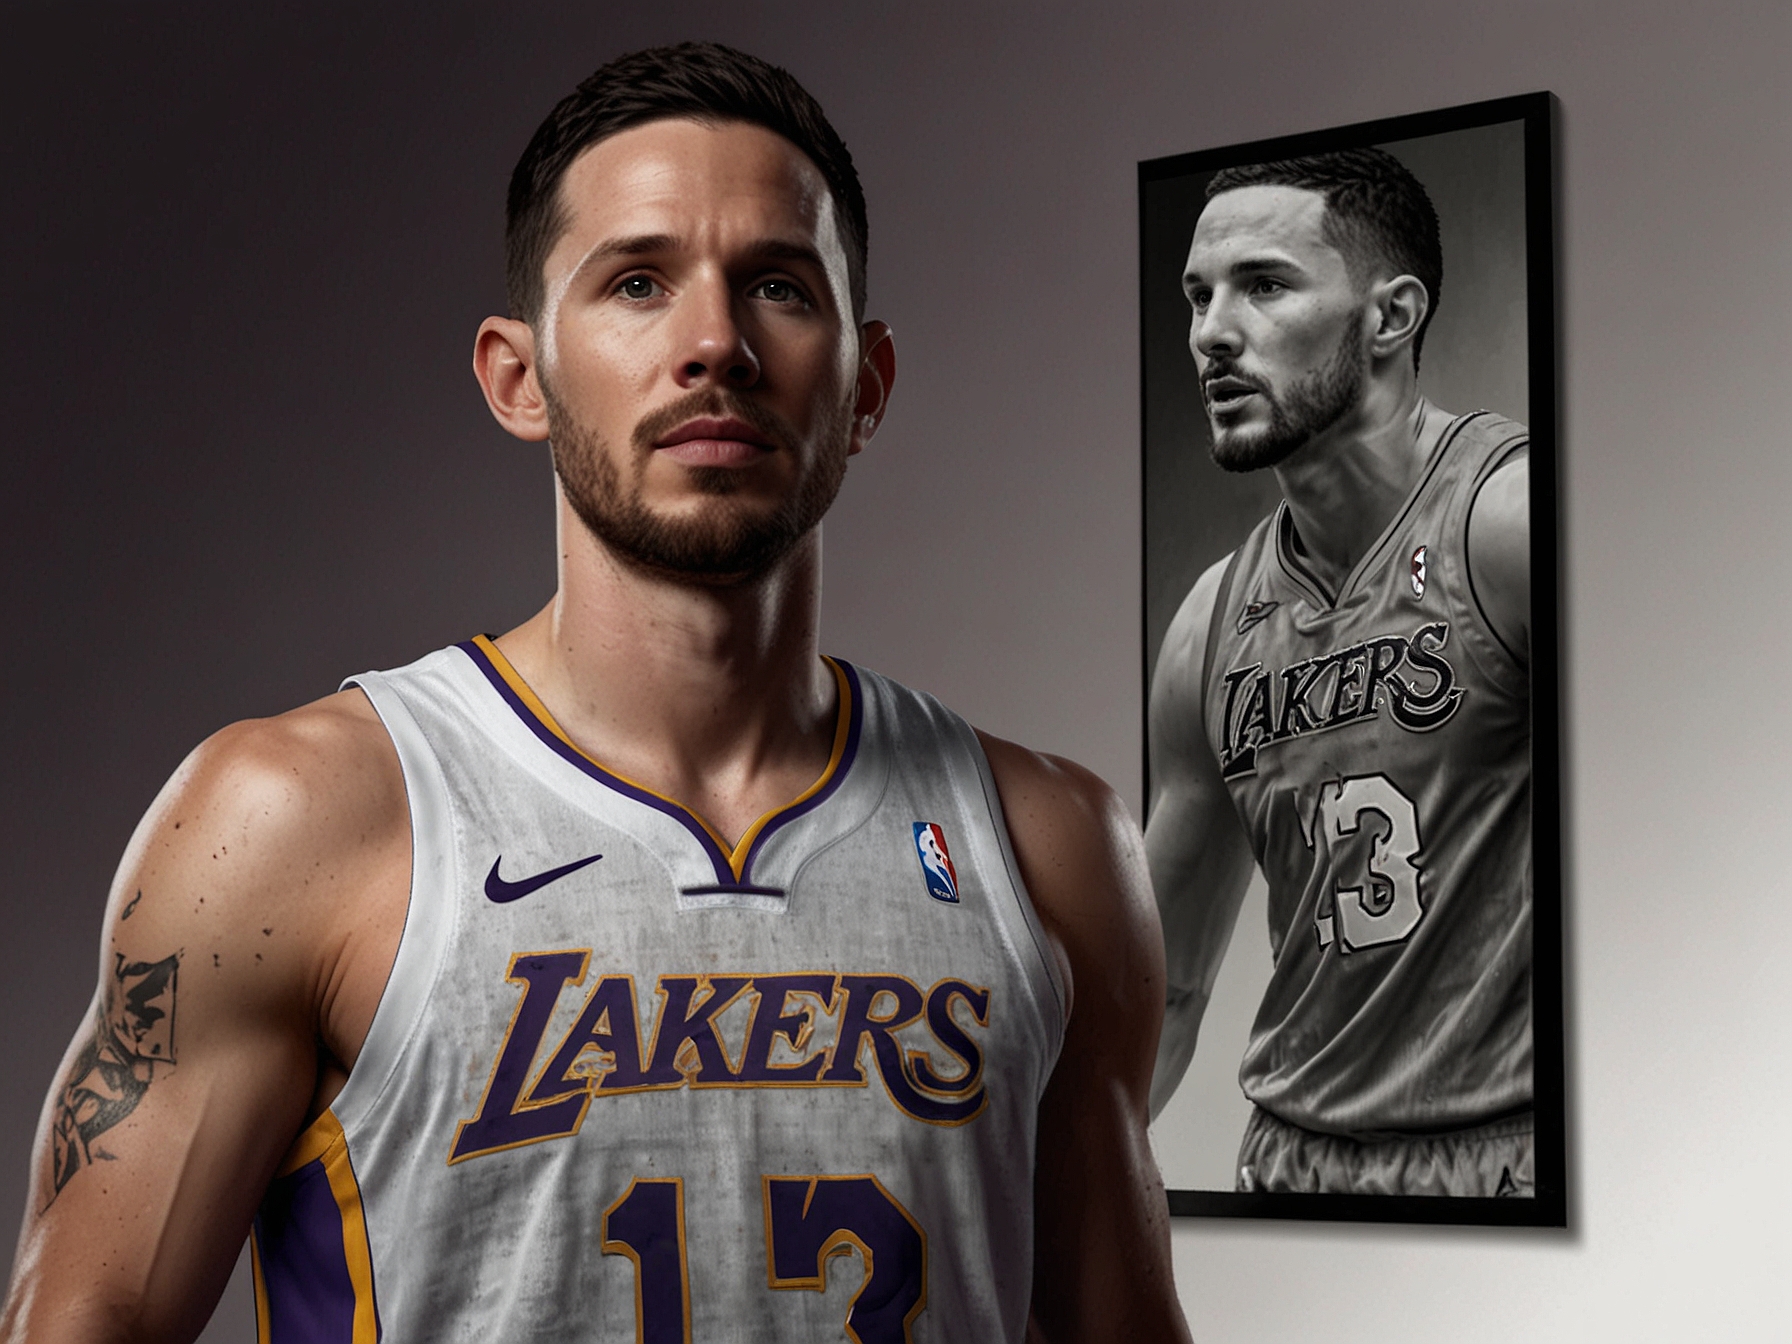 An image showing JJ Redick holding a Lakers jersey, symbolizing his transition from player to head coach for the team.